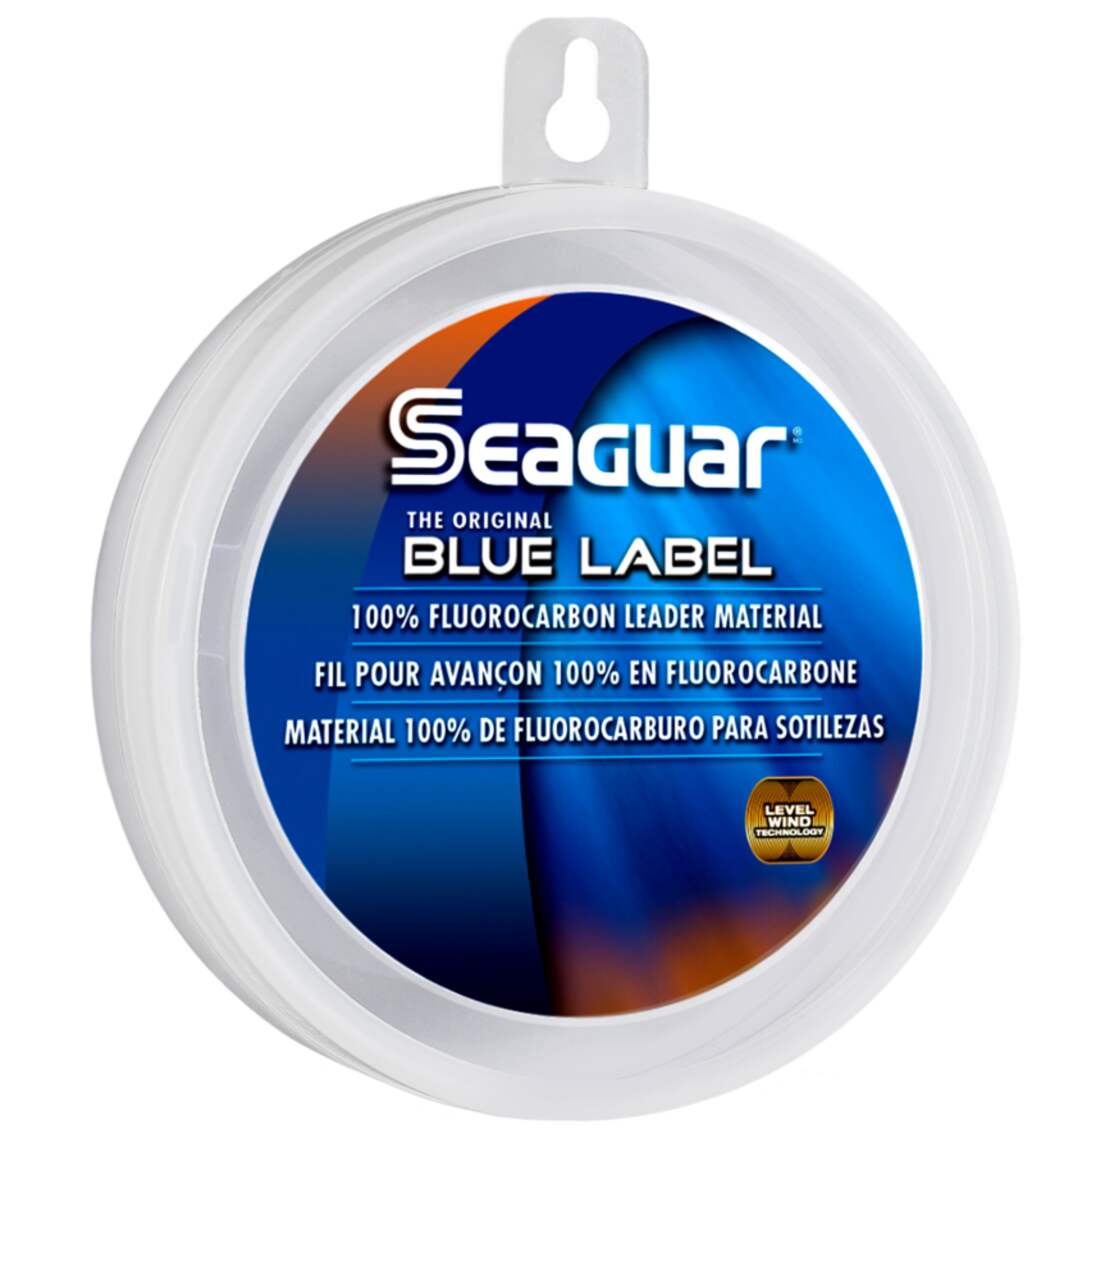 Seaguar Blue Label Fluorocarbon Leader Material, 25-yd, Clear